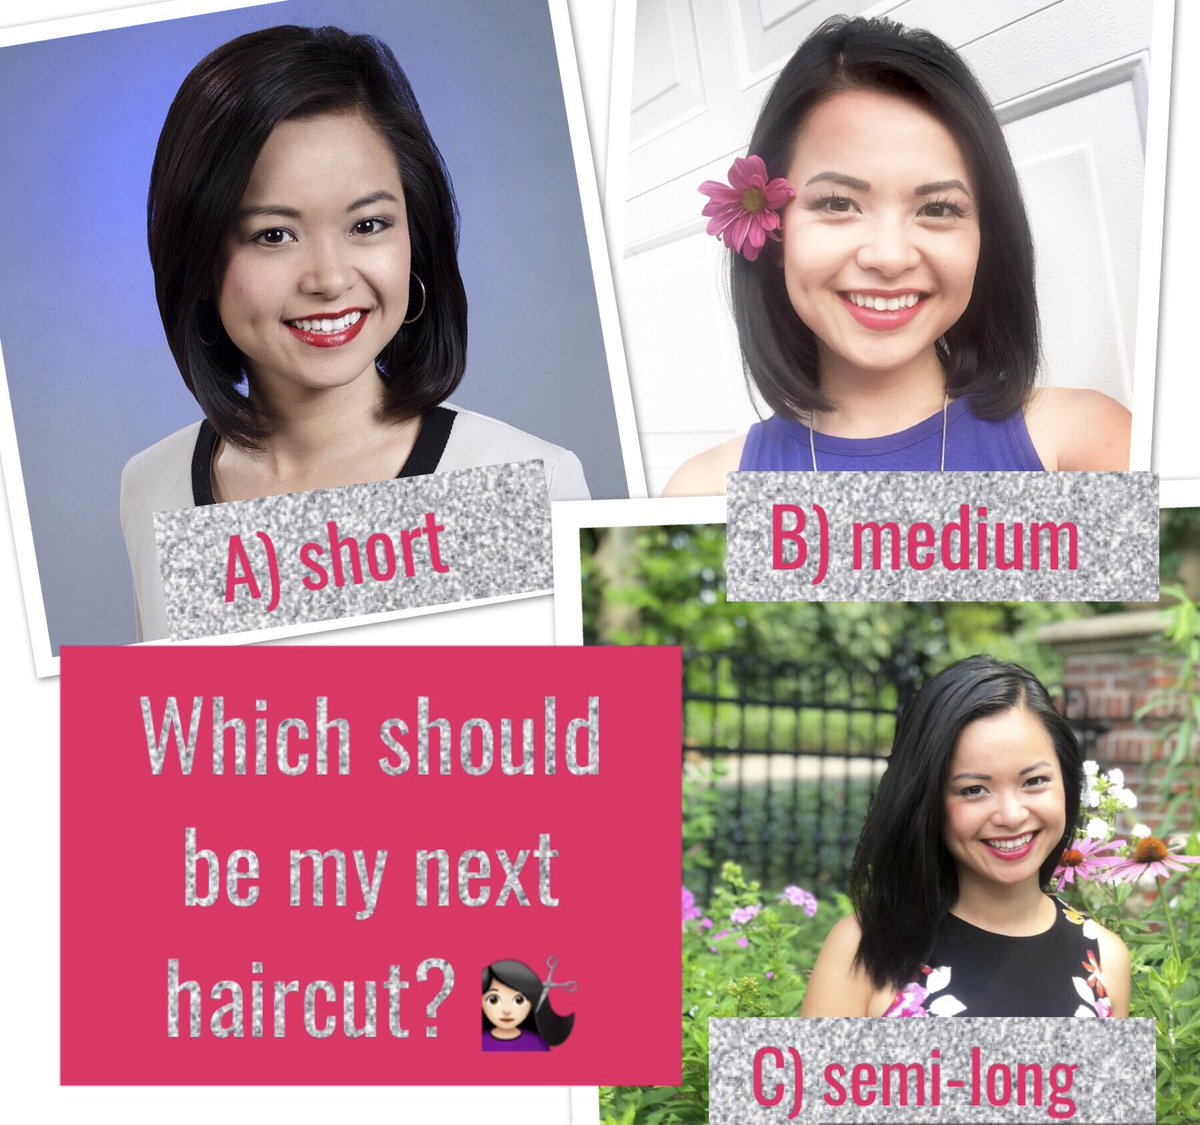 🤷🏻‍♀️ Help me decide! Going to get a haircut today! 💇🏻‍♀️

#partylikeajournalist #indecisive #hairappointment